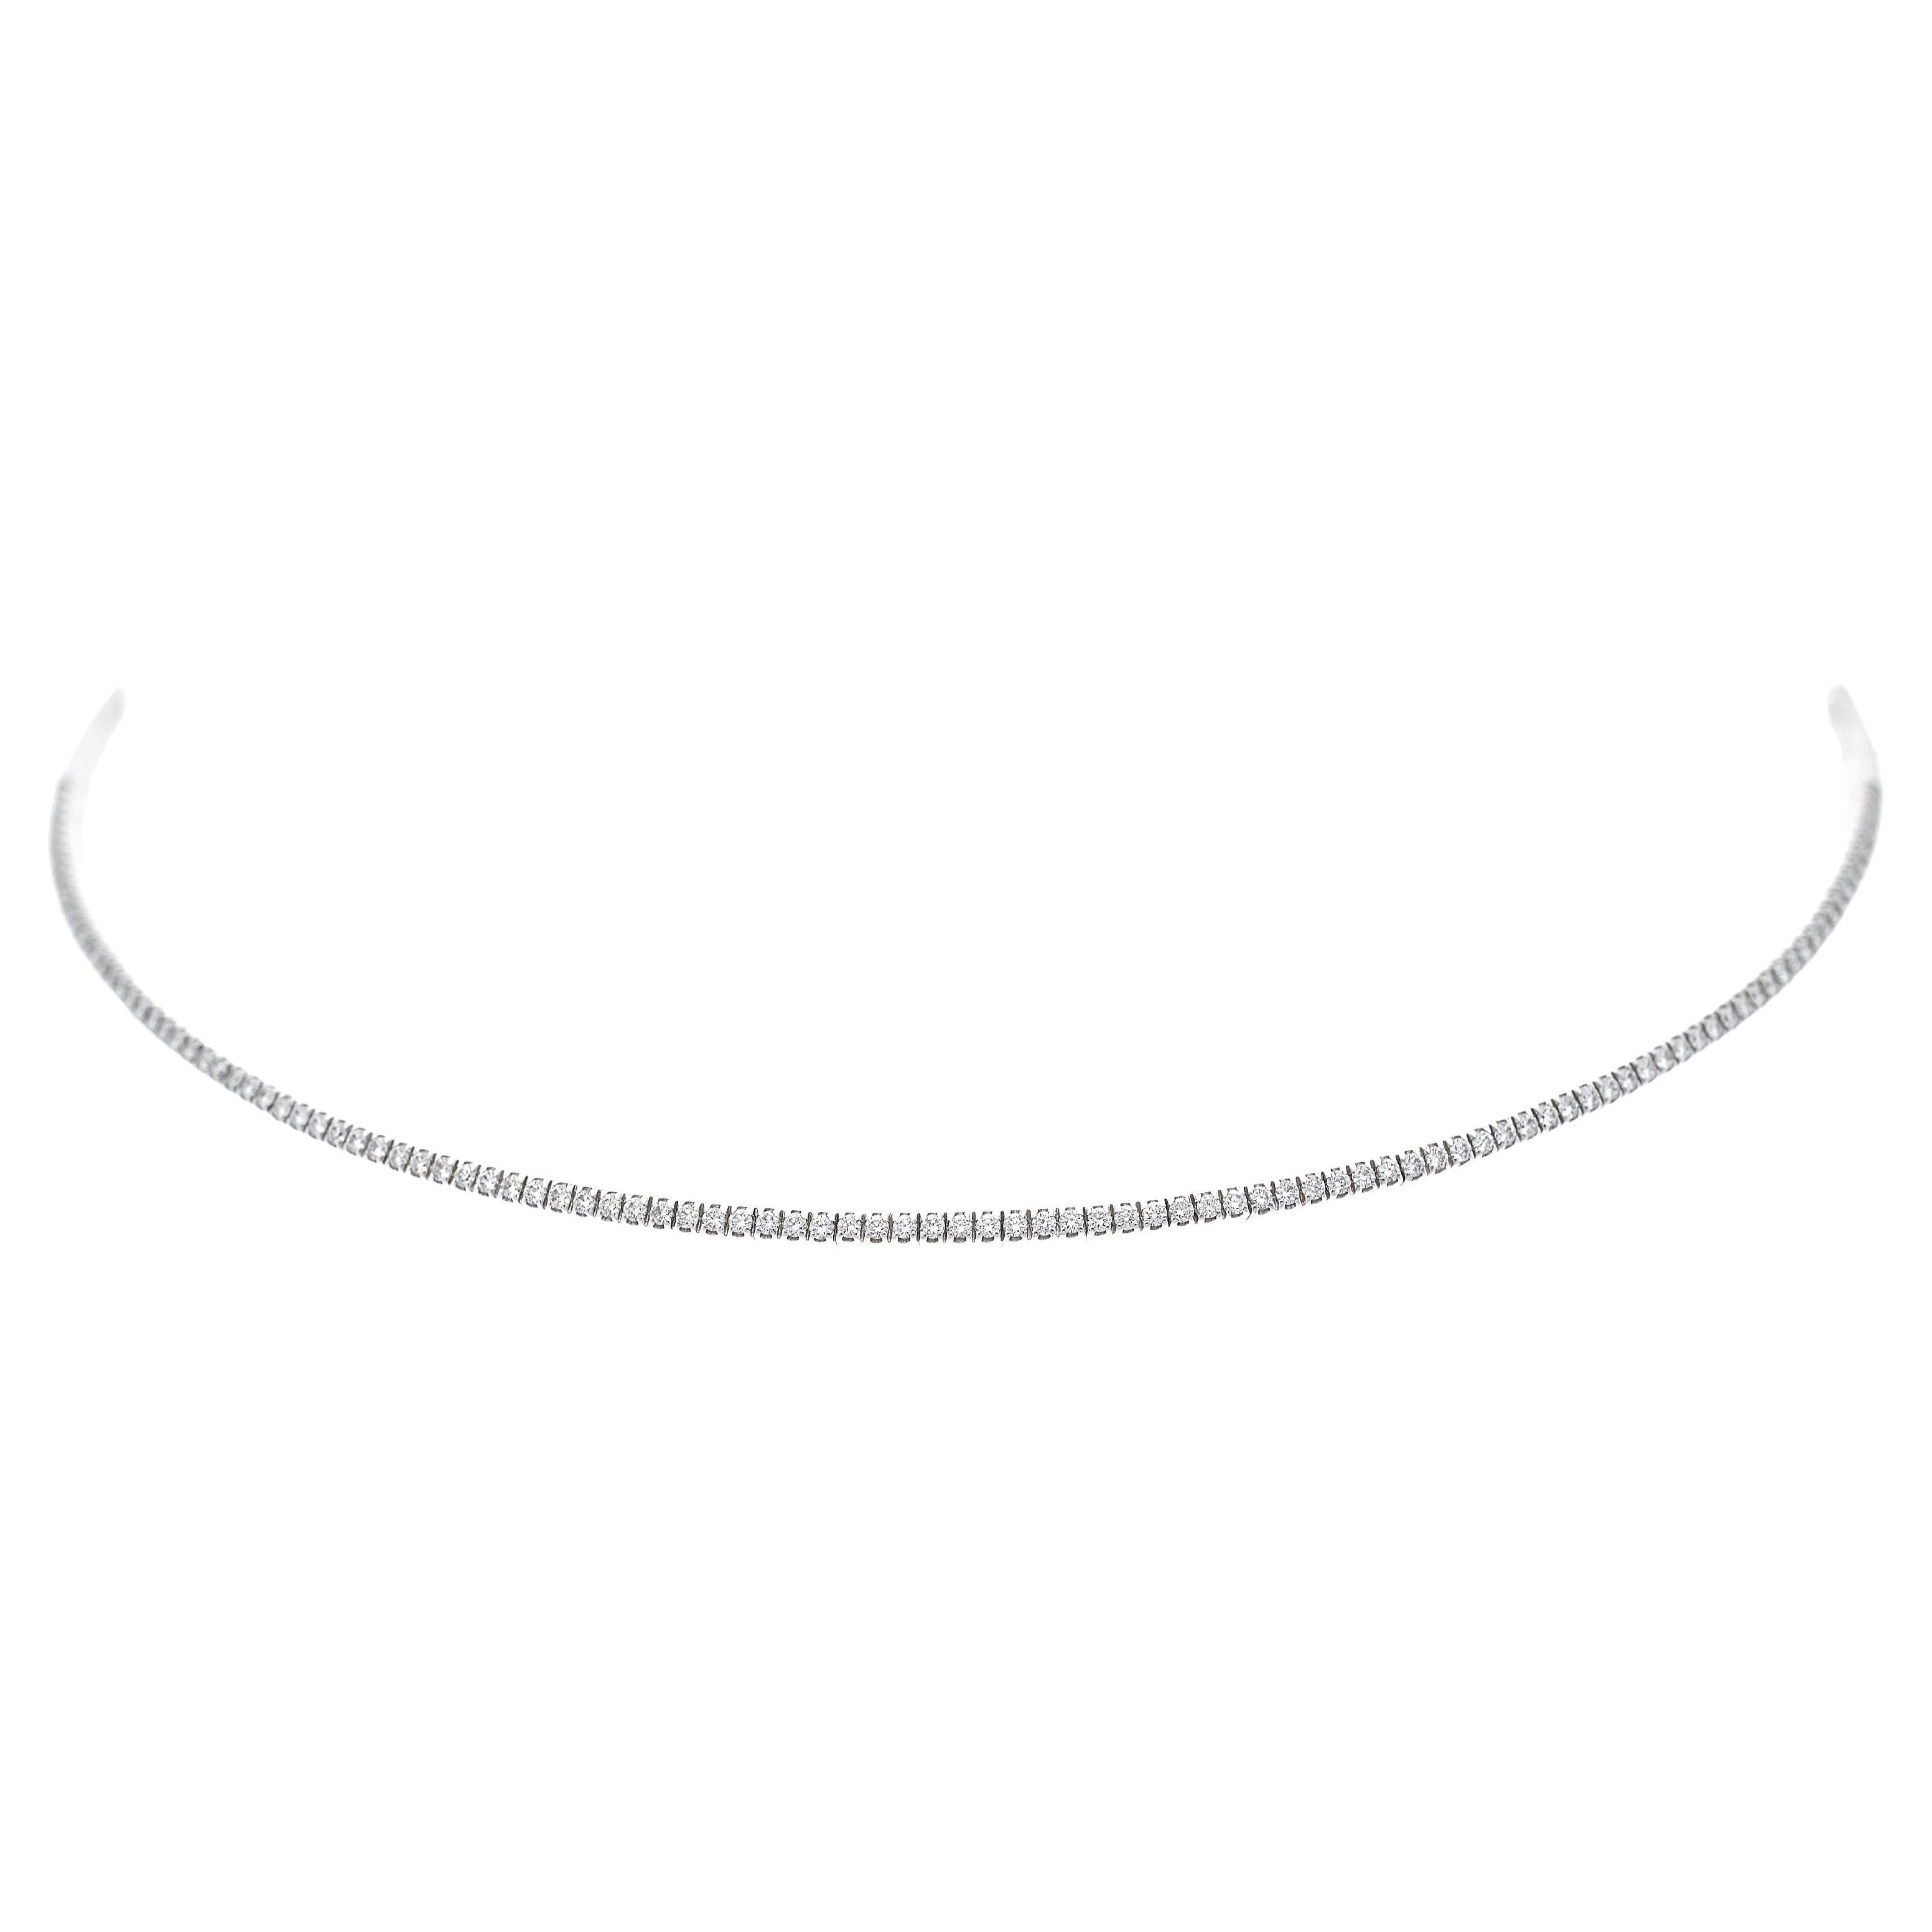 Diamonds 1.48 ct. Contemporary Chocker Necklace in 18 Kt Gold. Made in Italy For Sale